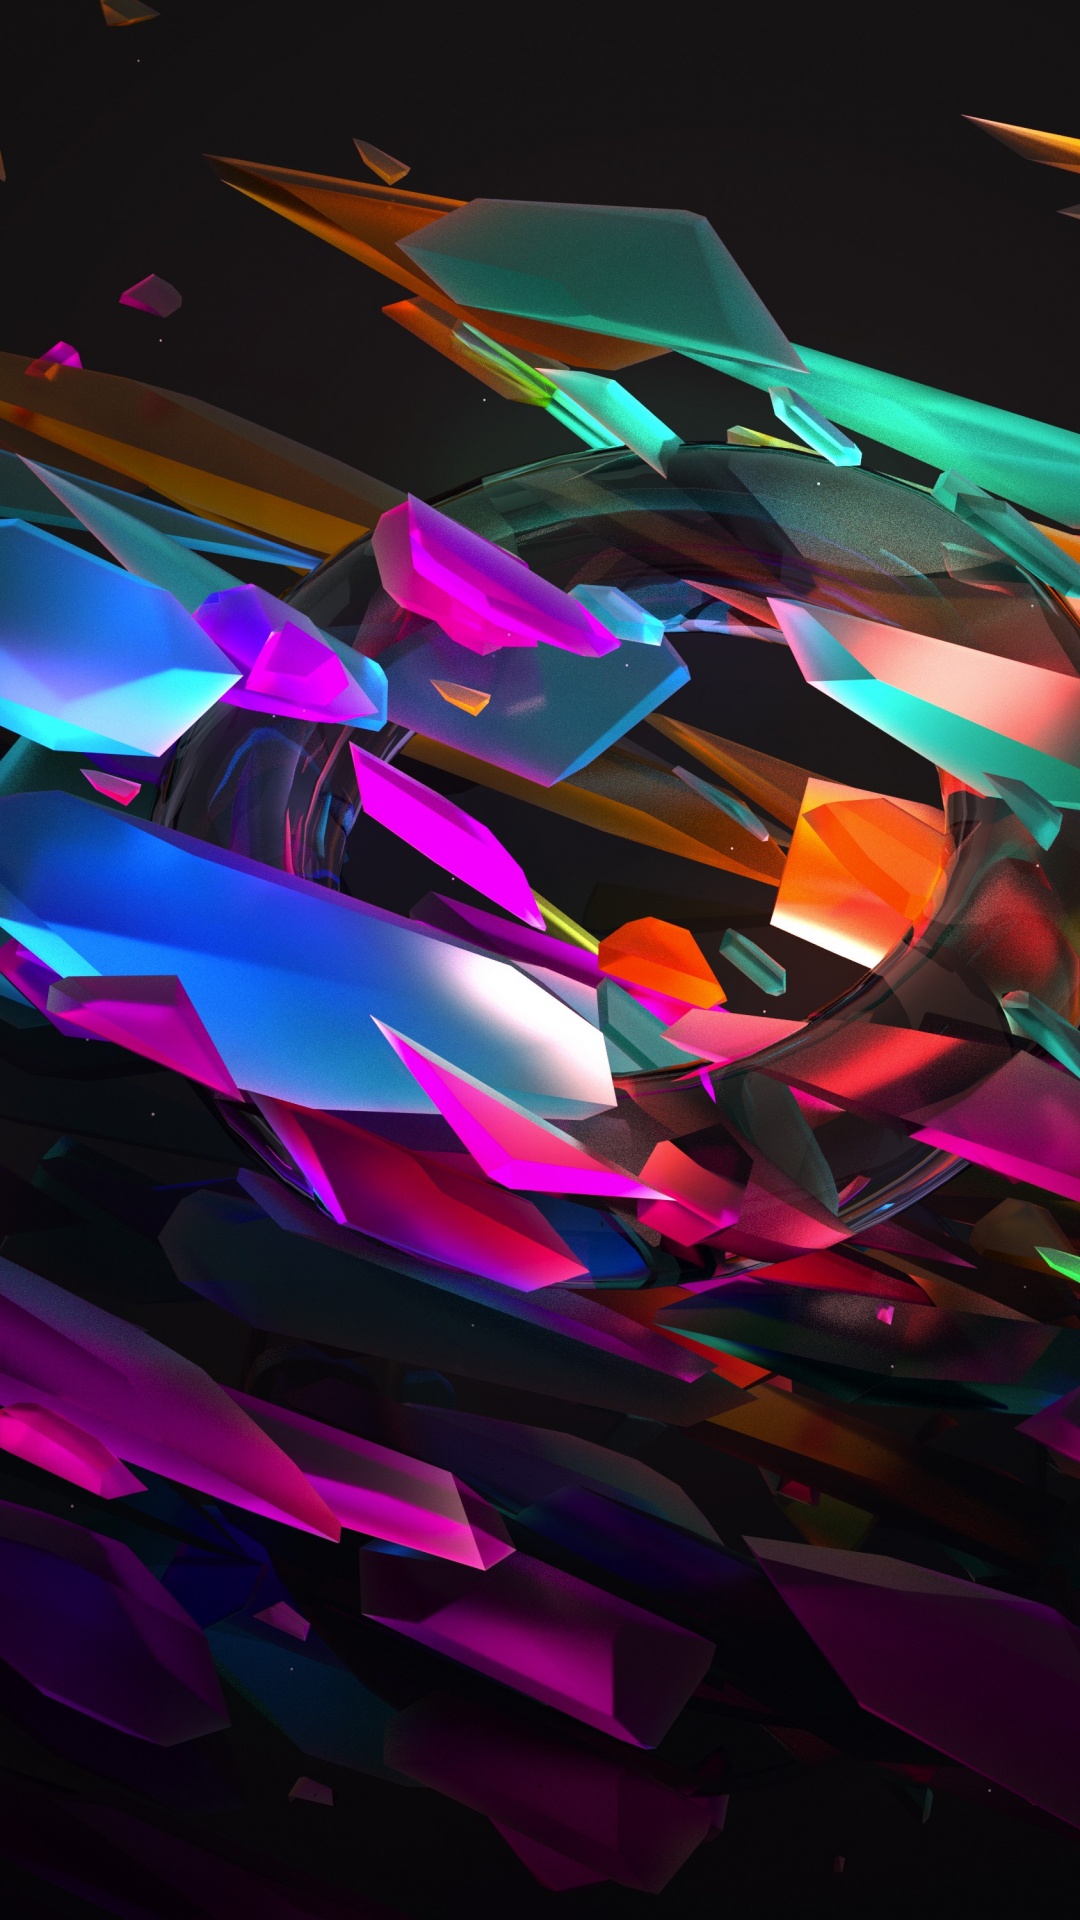 Purple Orange and Blue Abstract Art. Wallpaper in 1080x1920 Resolution